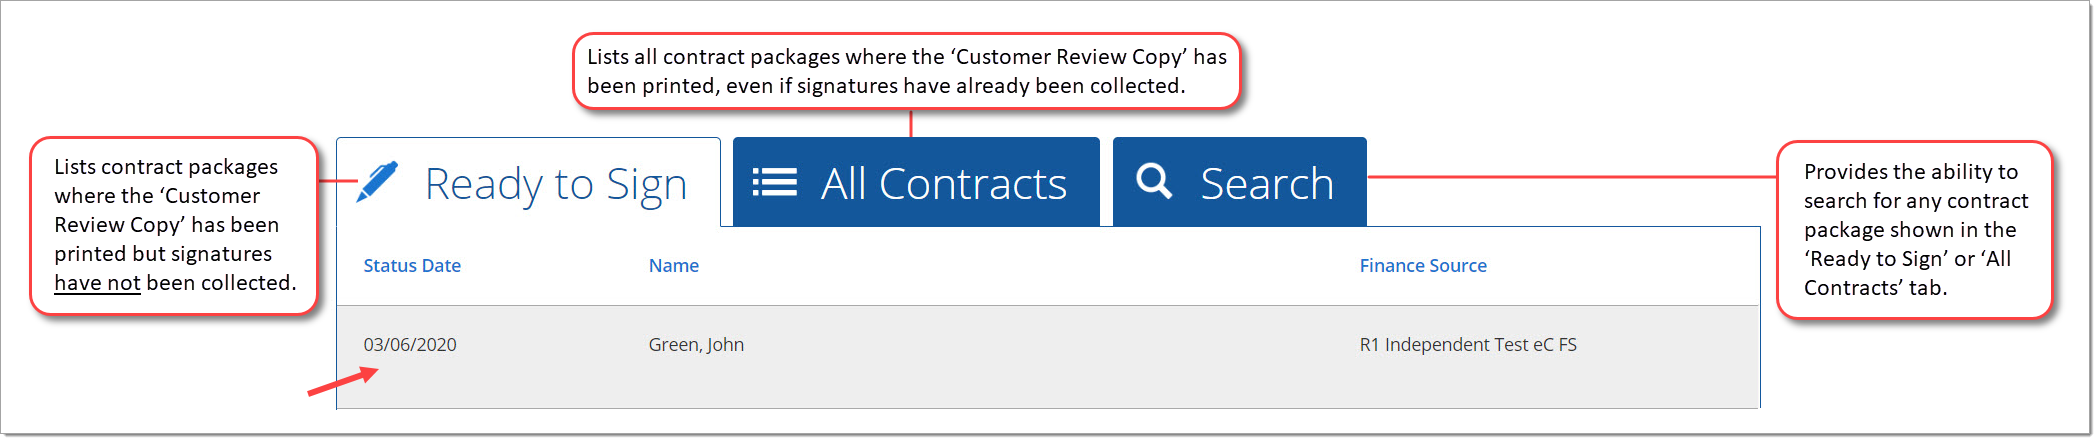 The ‘Ready to Sign’ tab of the eSign page, with an arrow pointing to the example contract package.  There is a text box corresponding to the ‘Ready to Sign’ tab that says ‘Lists contract packages where the Customer Review Copy has been printed but signatures have not been collected’, a text box corresponding to the ‘All Contracts’ tab that says ‘Lists all contract packagaes where the Customer Review Copy has been printed, even if signatures have already been collected’, and a text box corresponding to the ‘